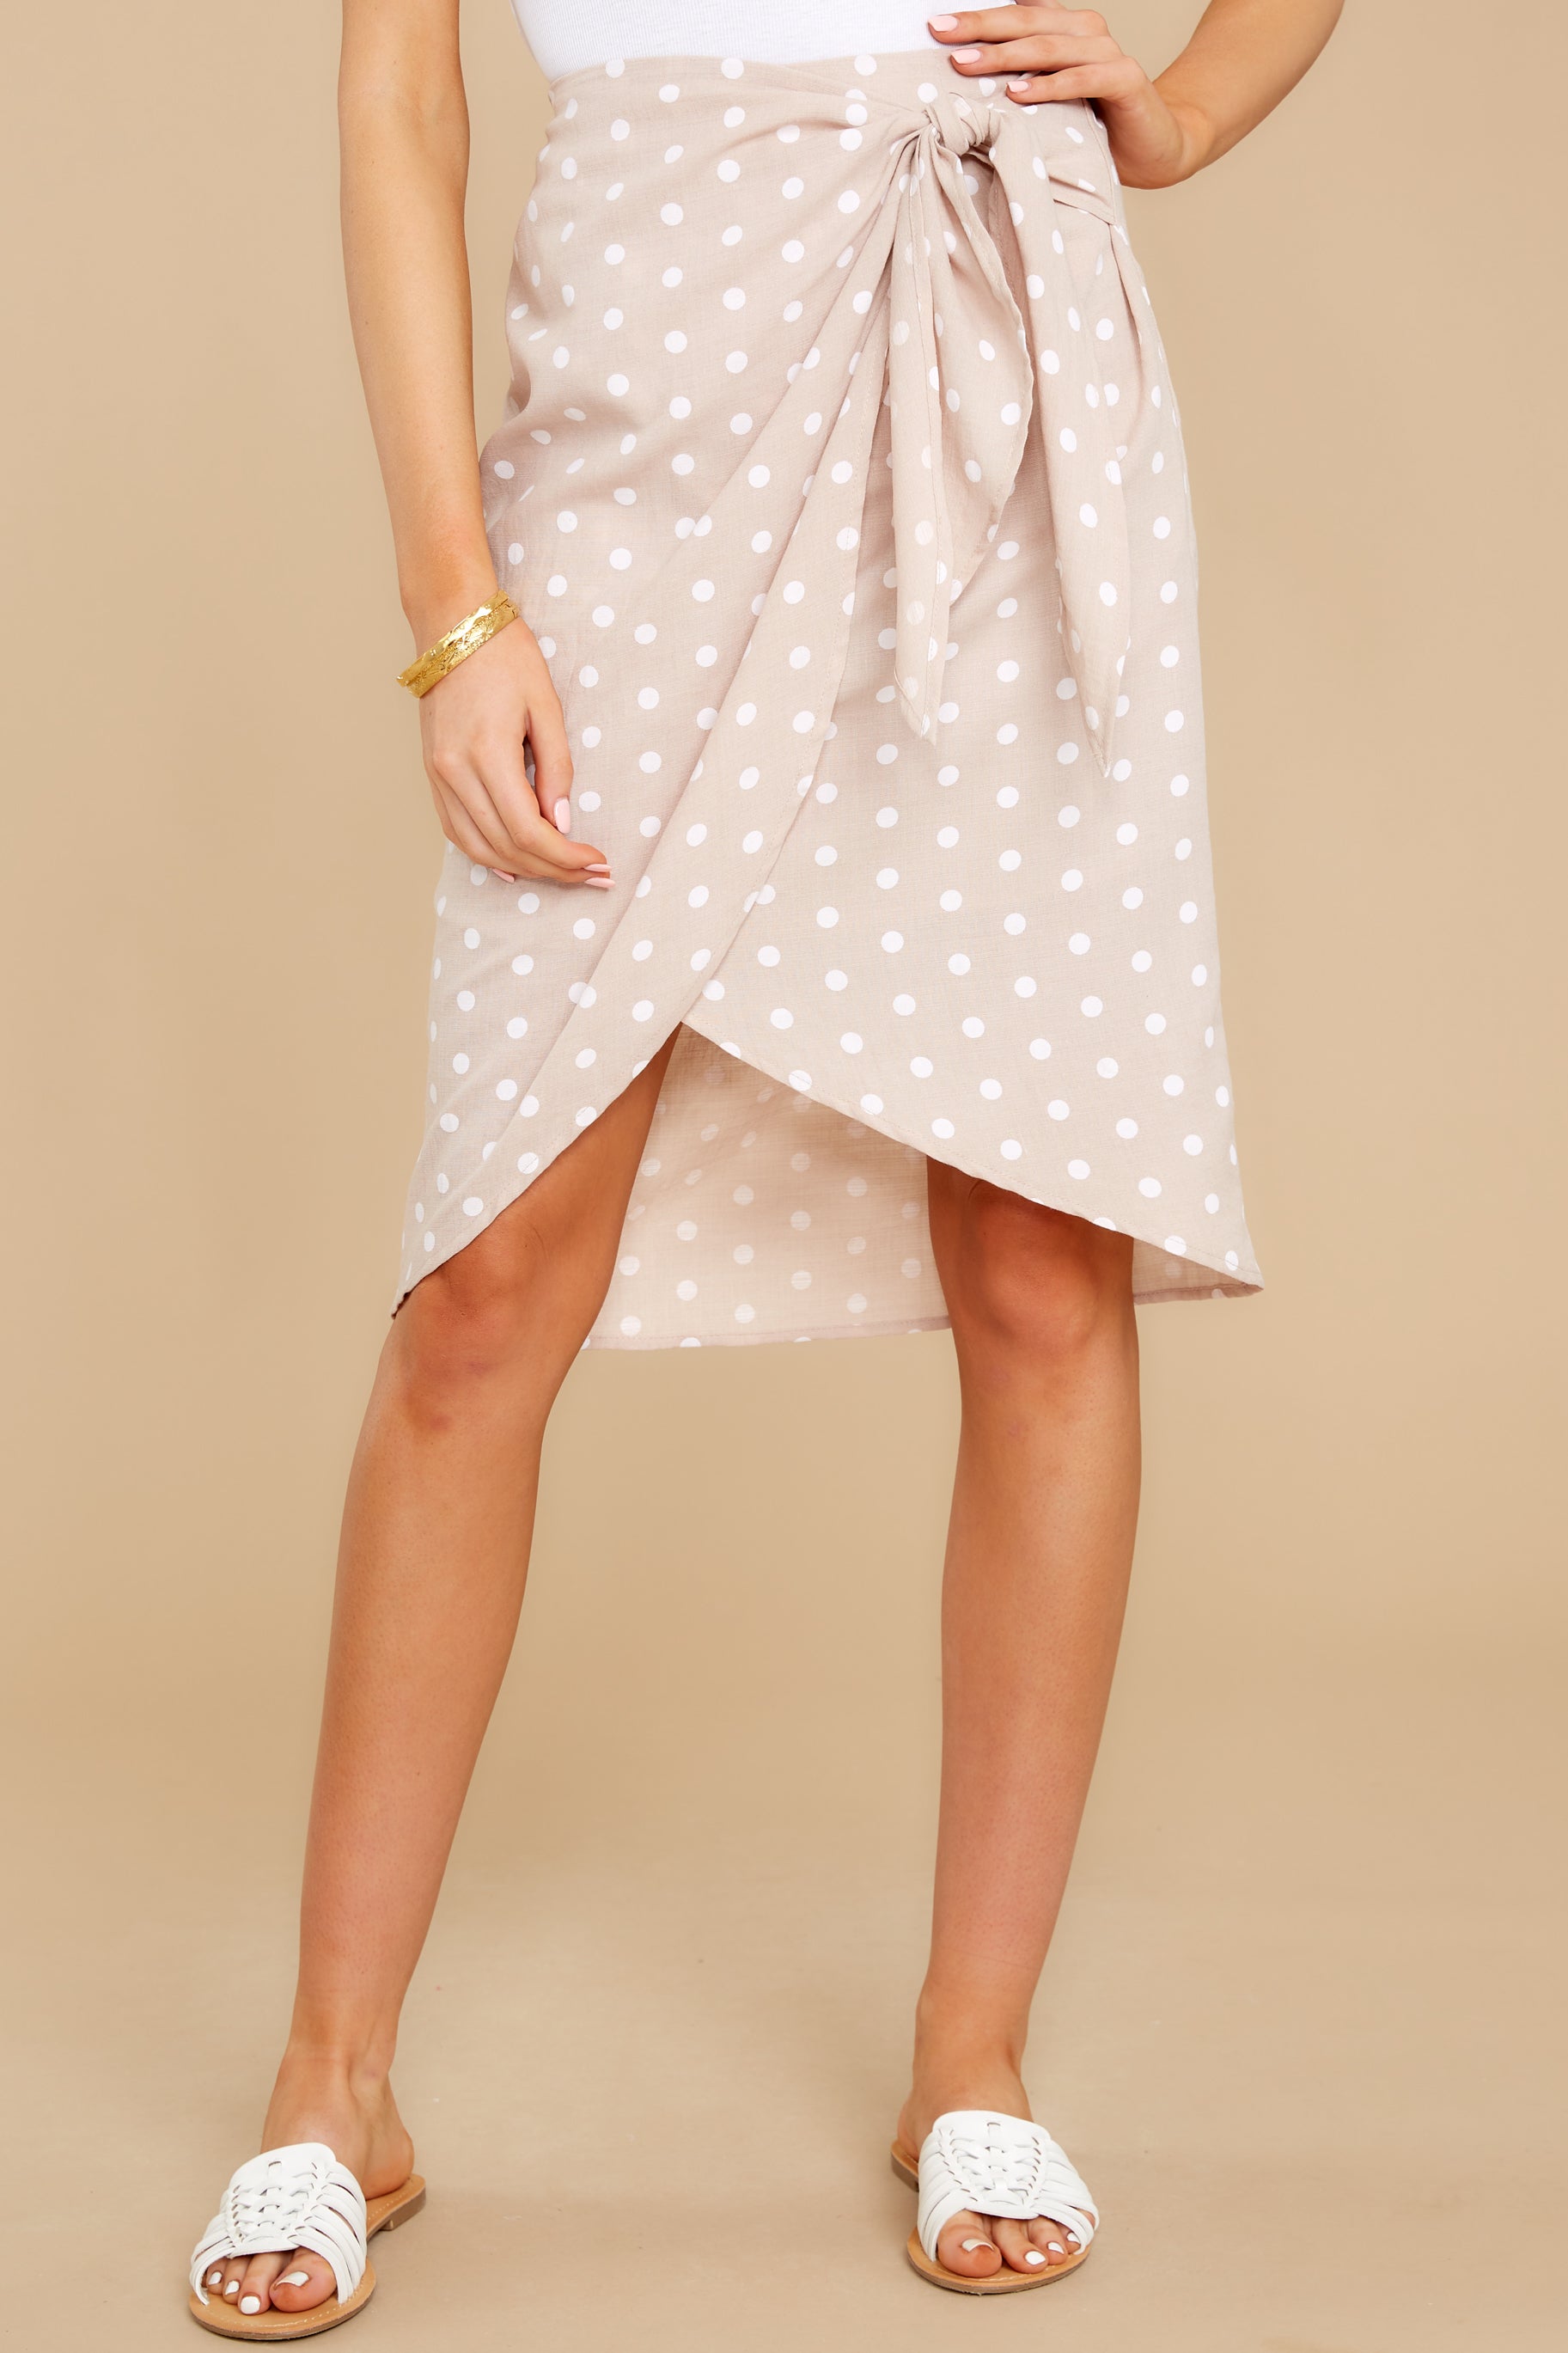 1 Adored By You Taupe Polka Dot Skirt at reddress.com